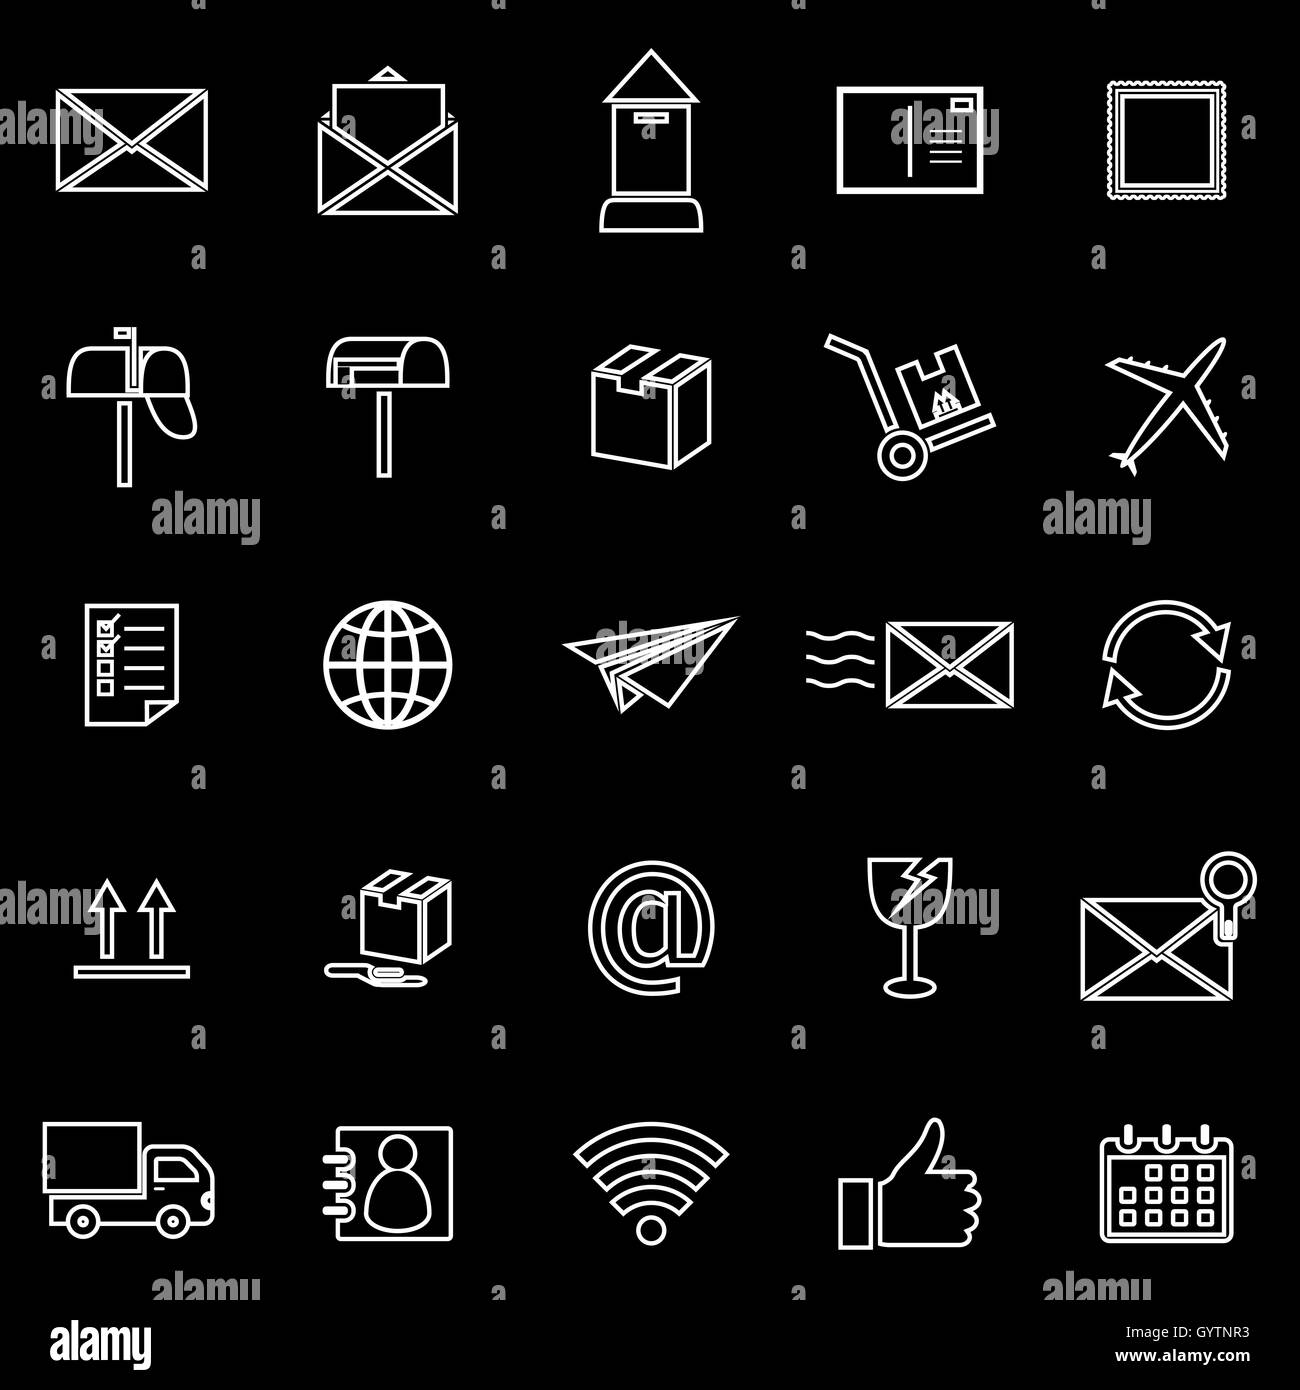 Post line icons on black background, stock vector Stock Vector